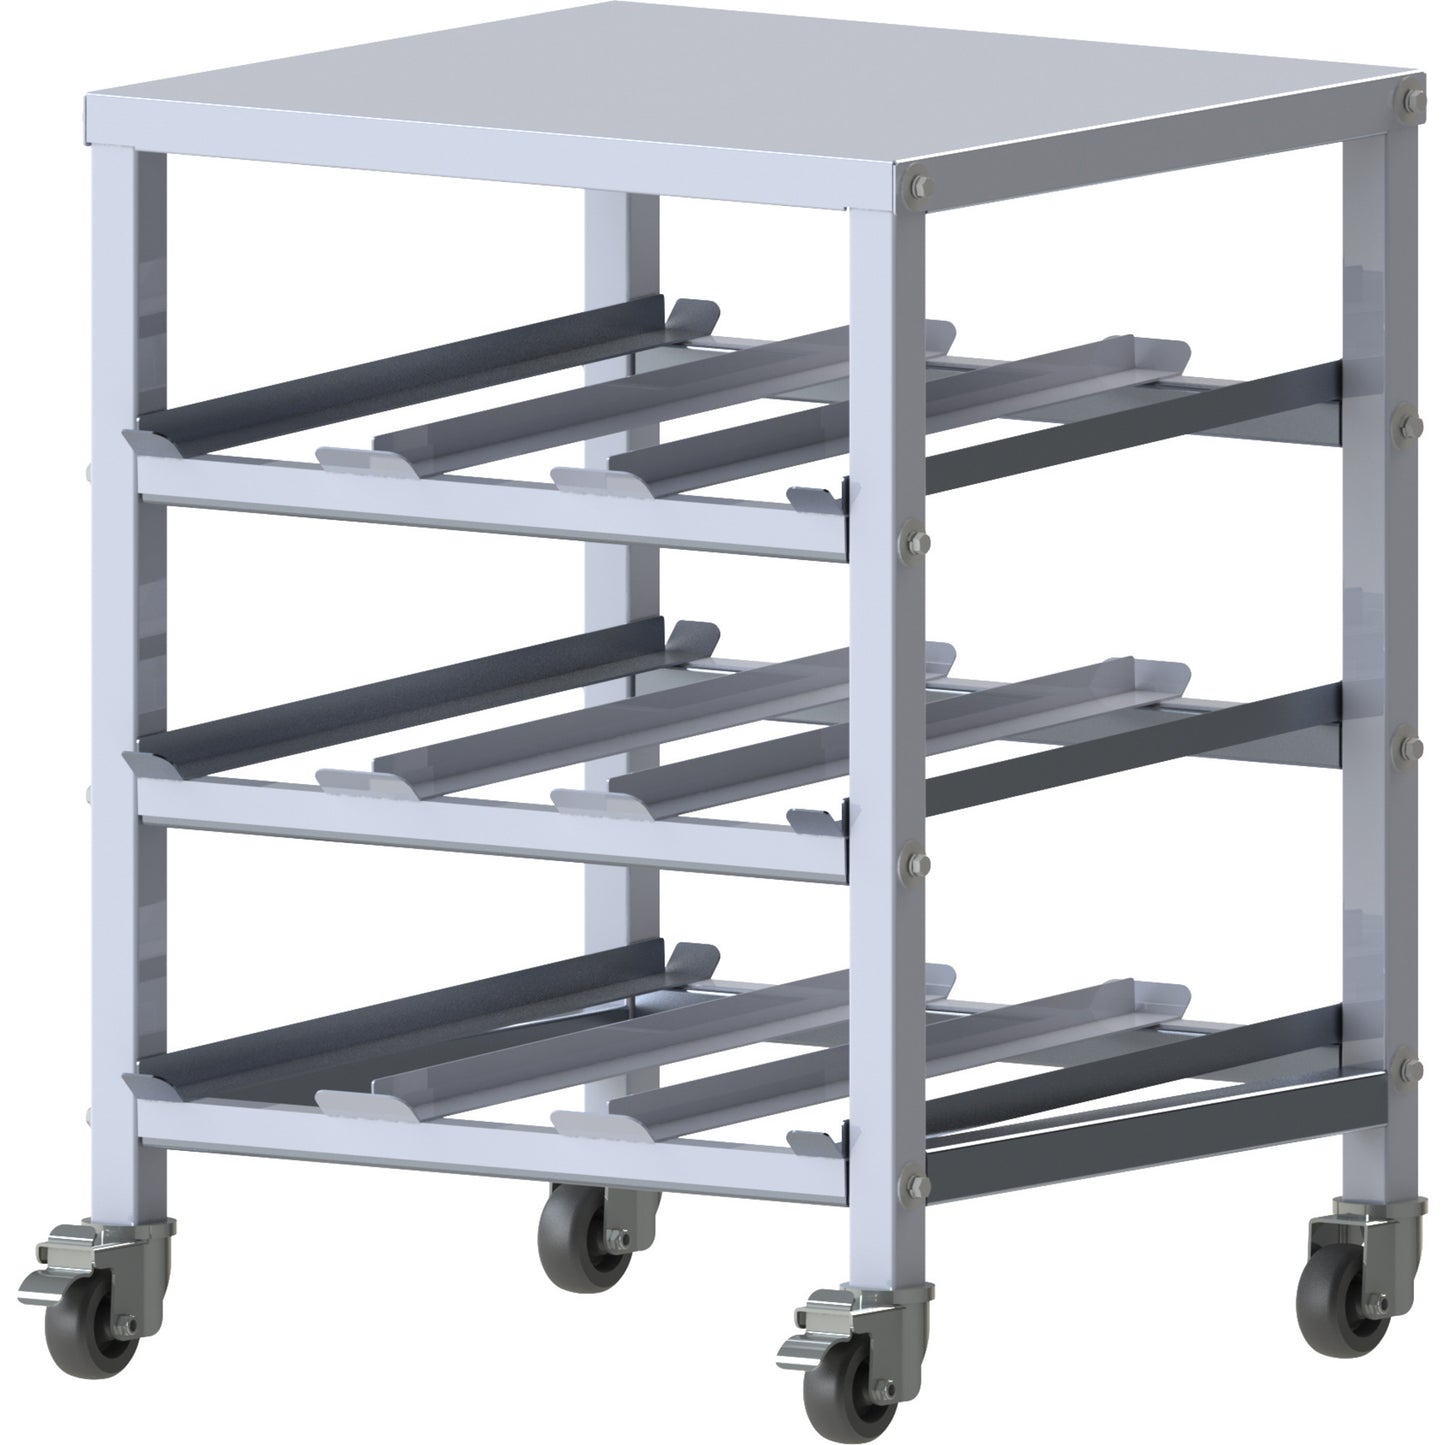 ALCR-3M - Mobile Under-Counter 3-Tier Can Storage Rack